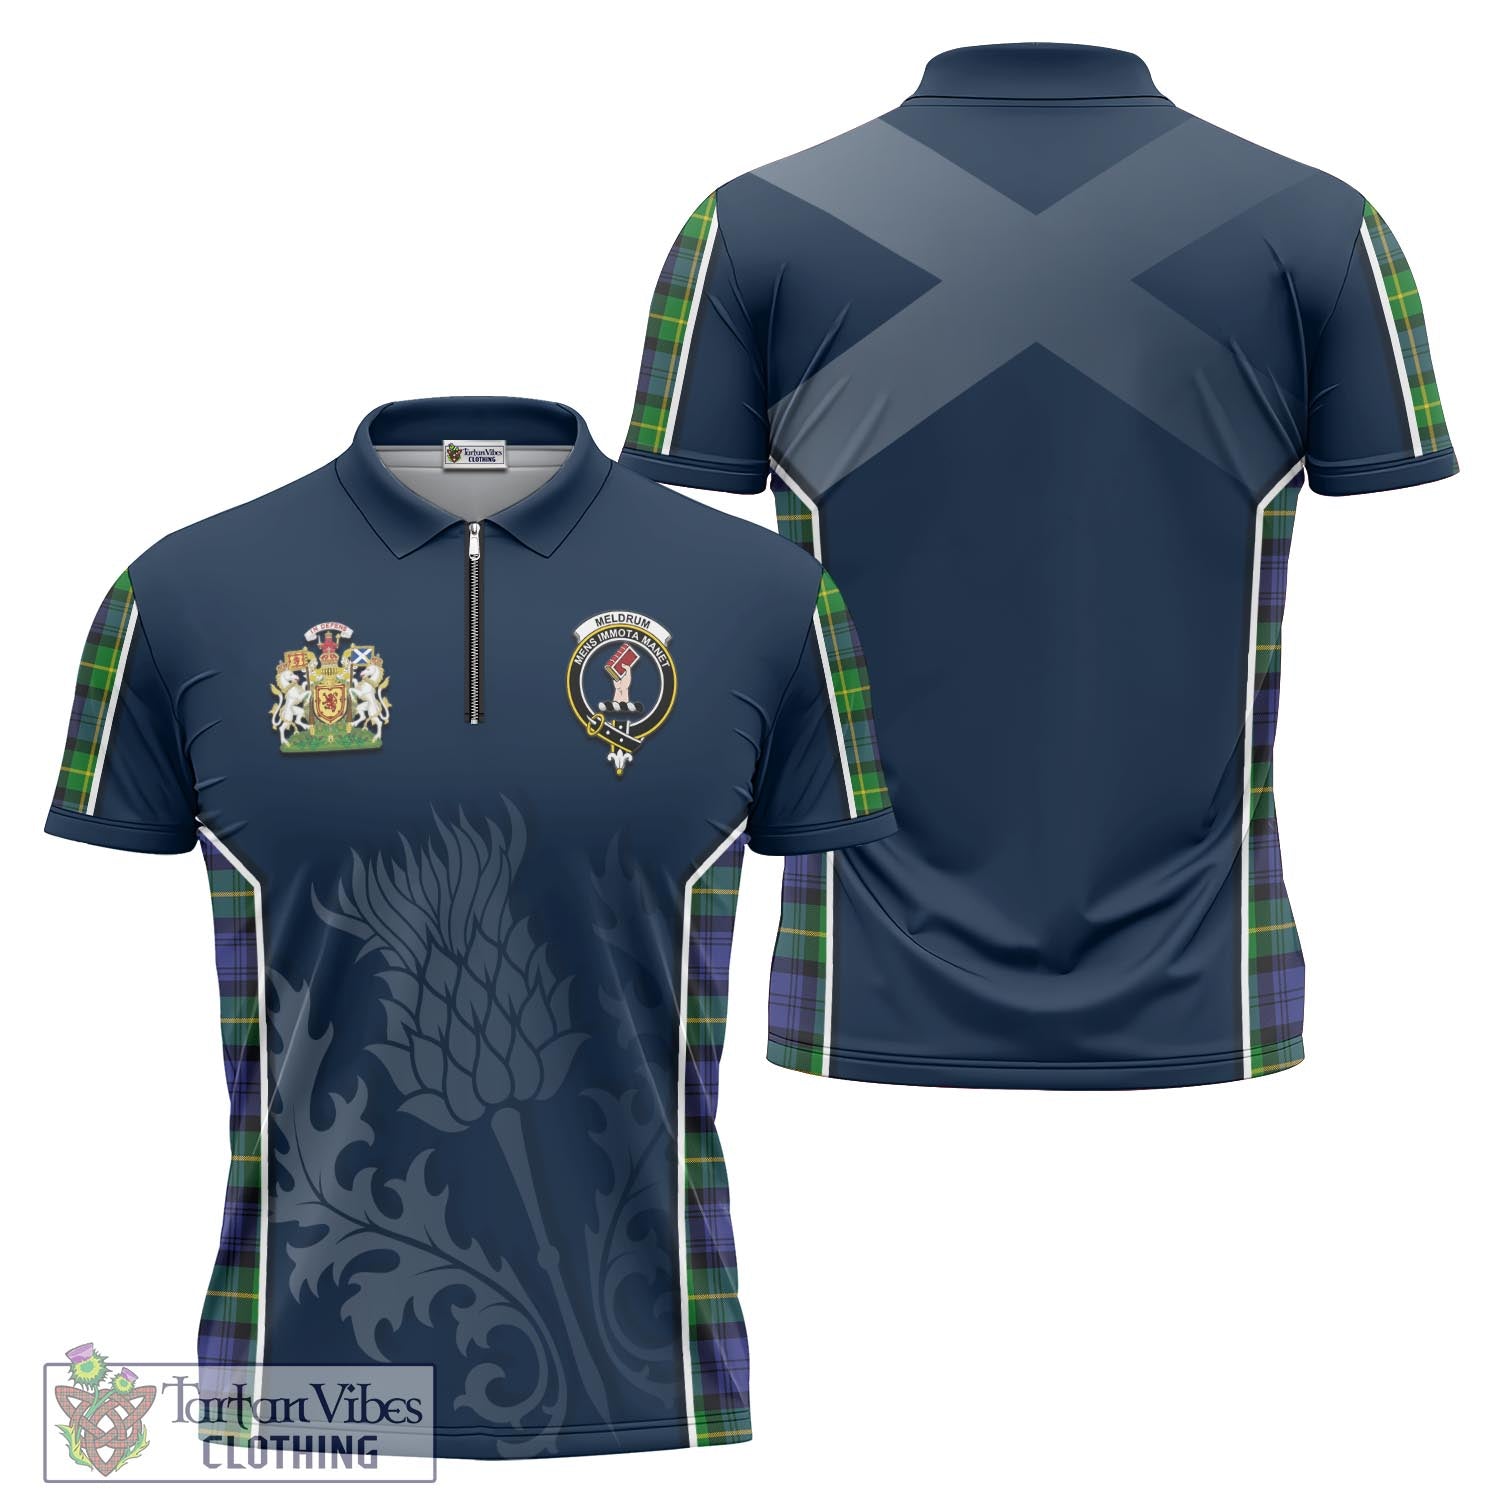 Tartan Vibes Clothing Meldrum Tartan Zipper Polo Shirt with Family Crest and Scottish Thistle Vibes Sport Style